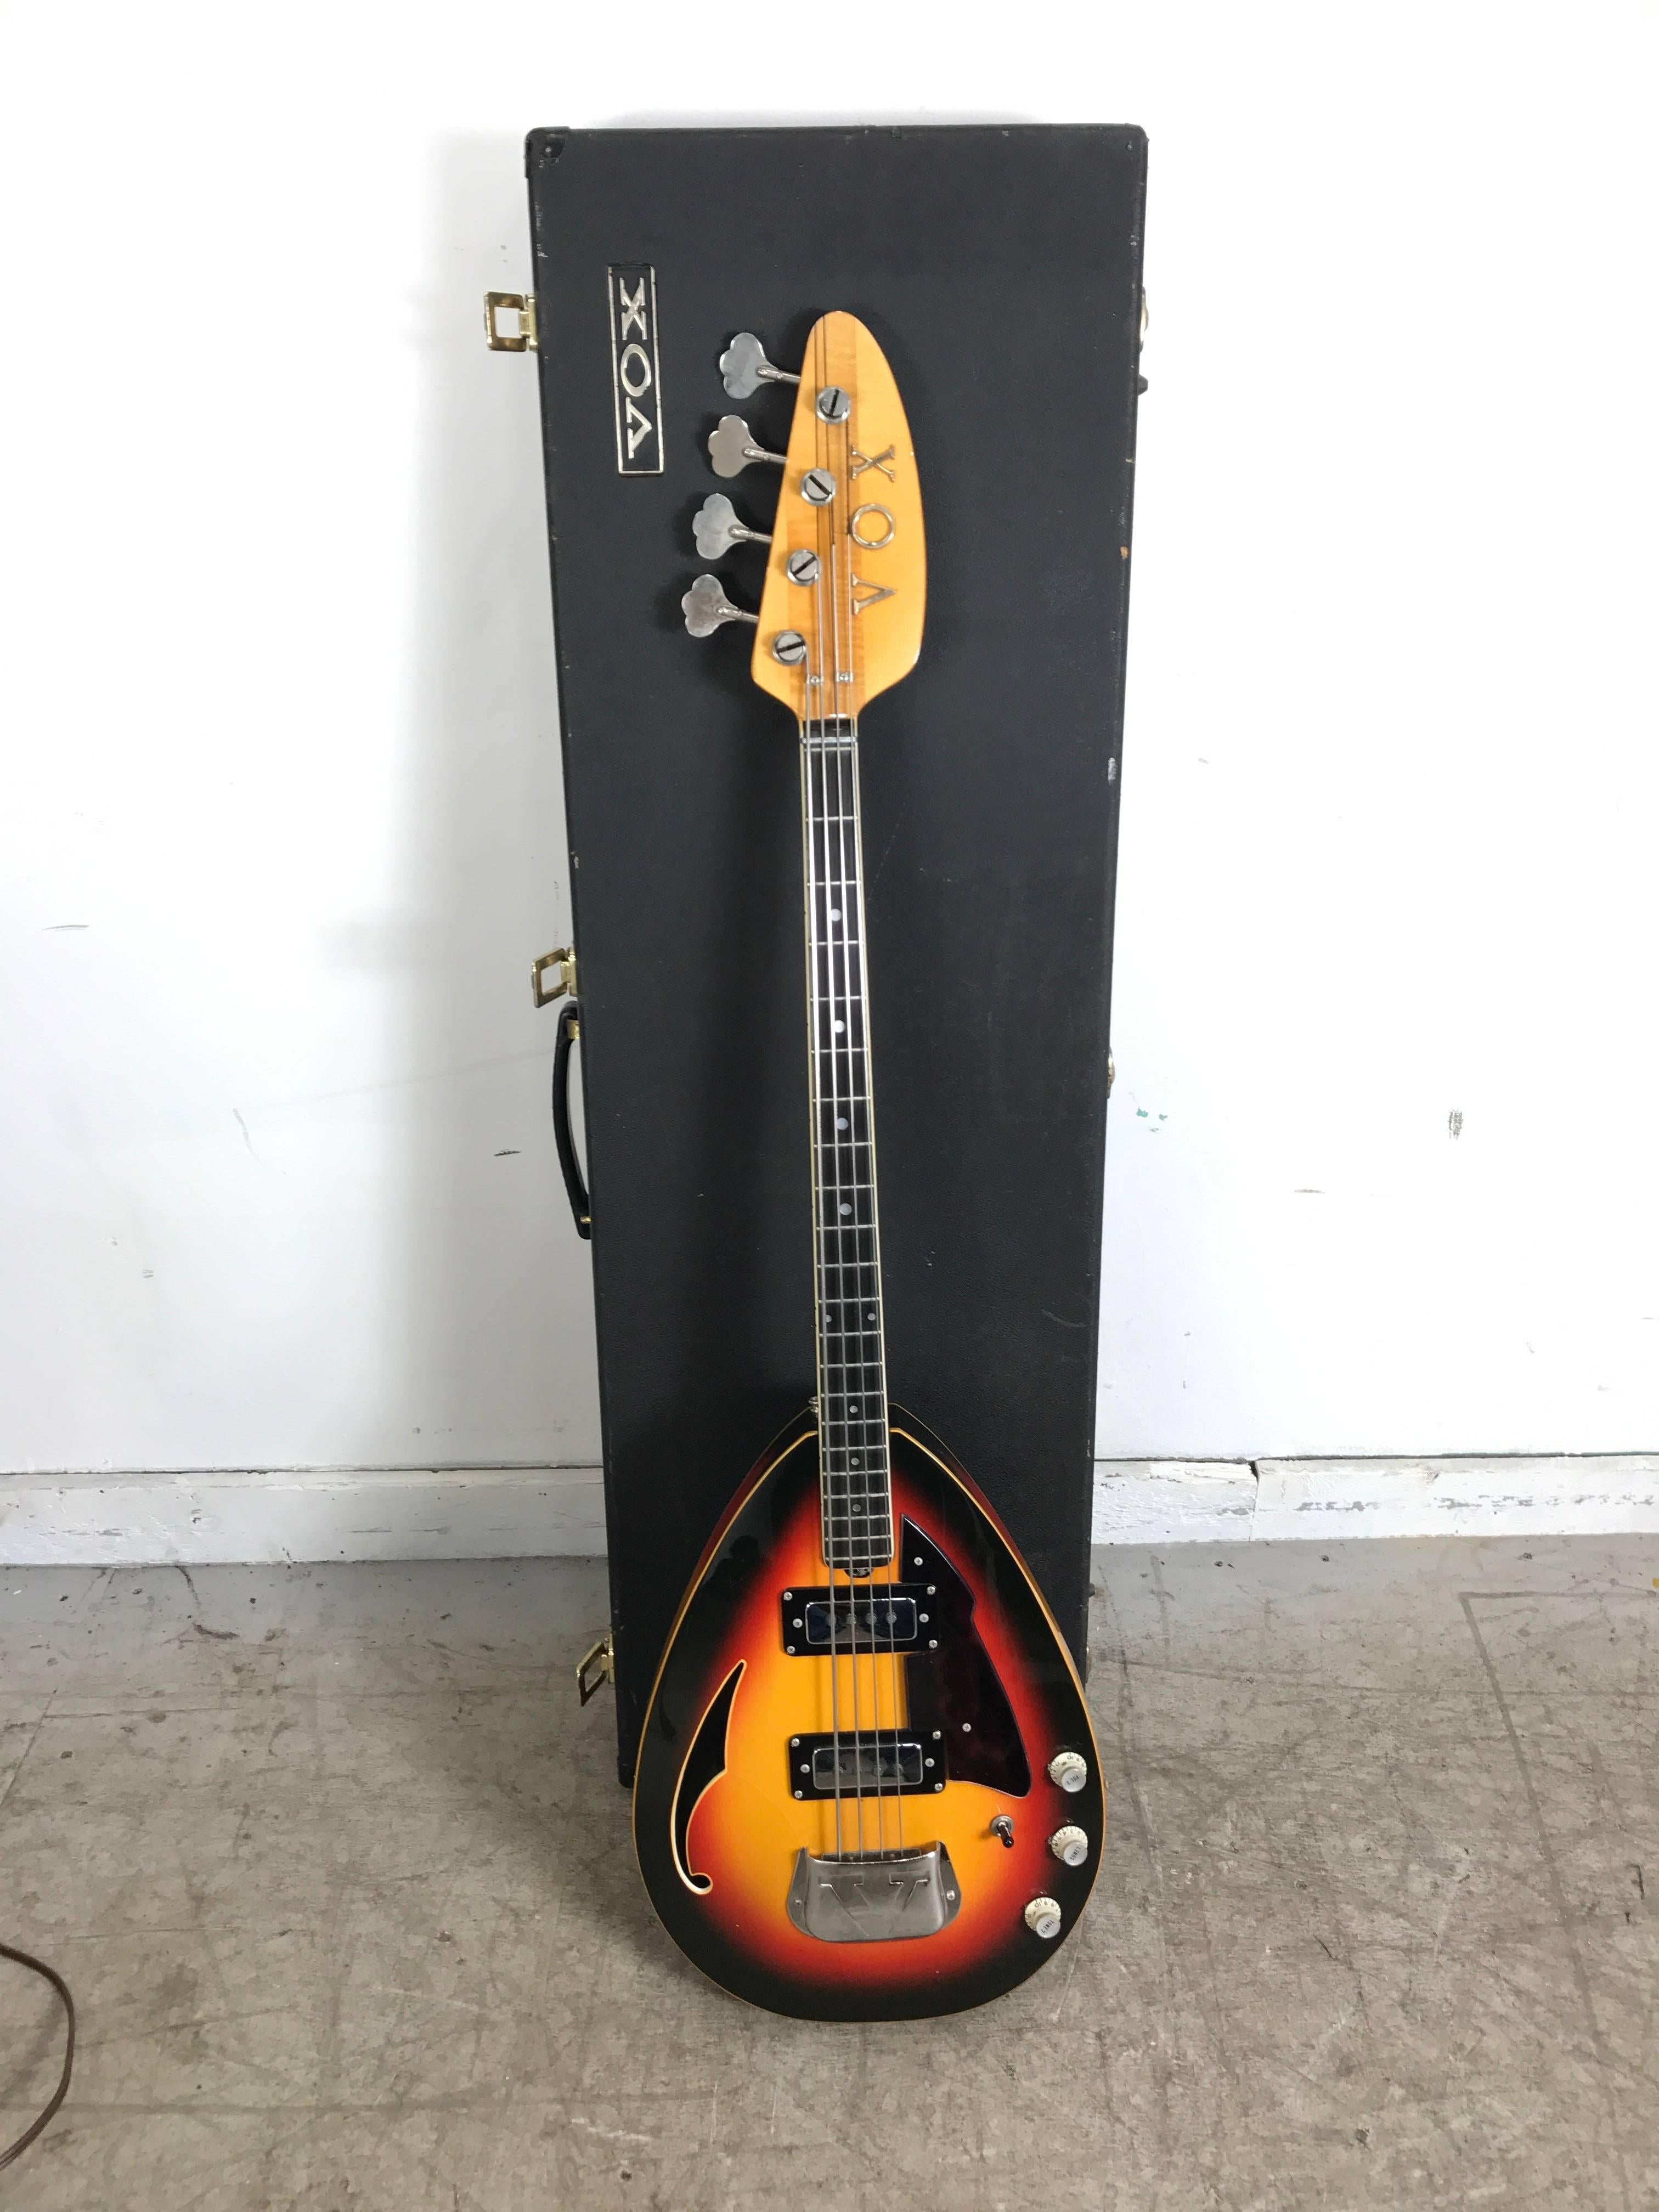 Rare 1968 Vox teardrop bass guitar V284 Stinger IV, made in Italy, tested and in fine working condition. Low action. Straight neck, retains original Vox hard shell case.